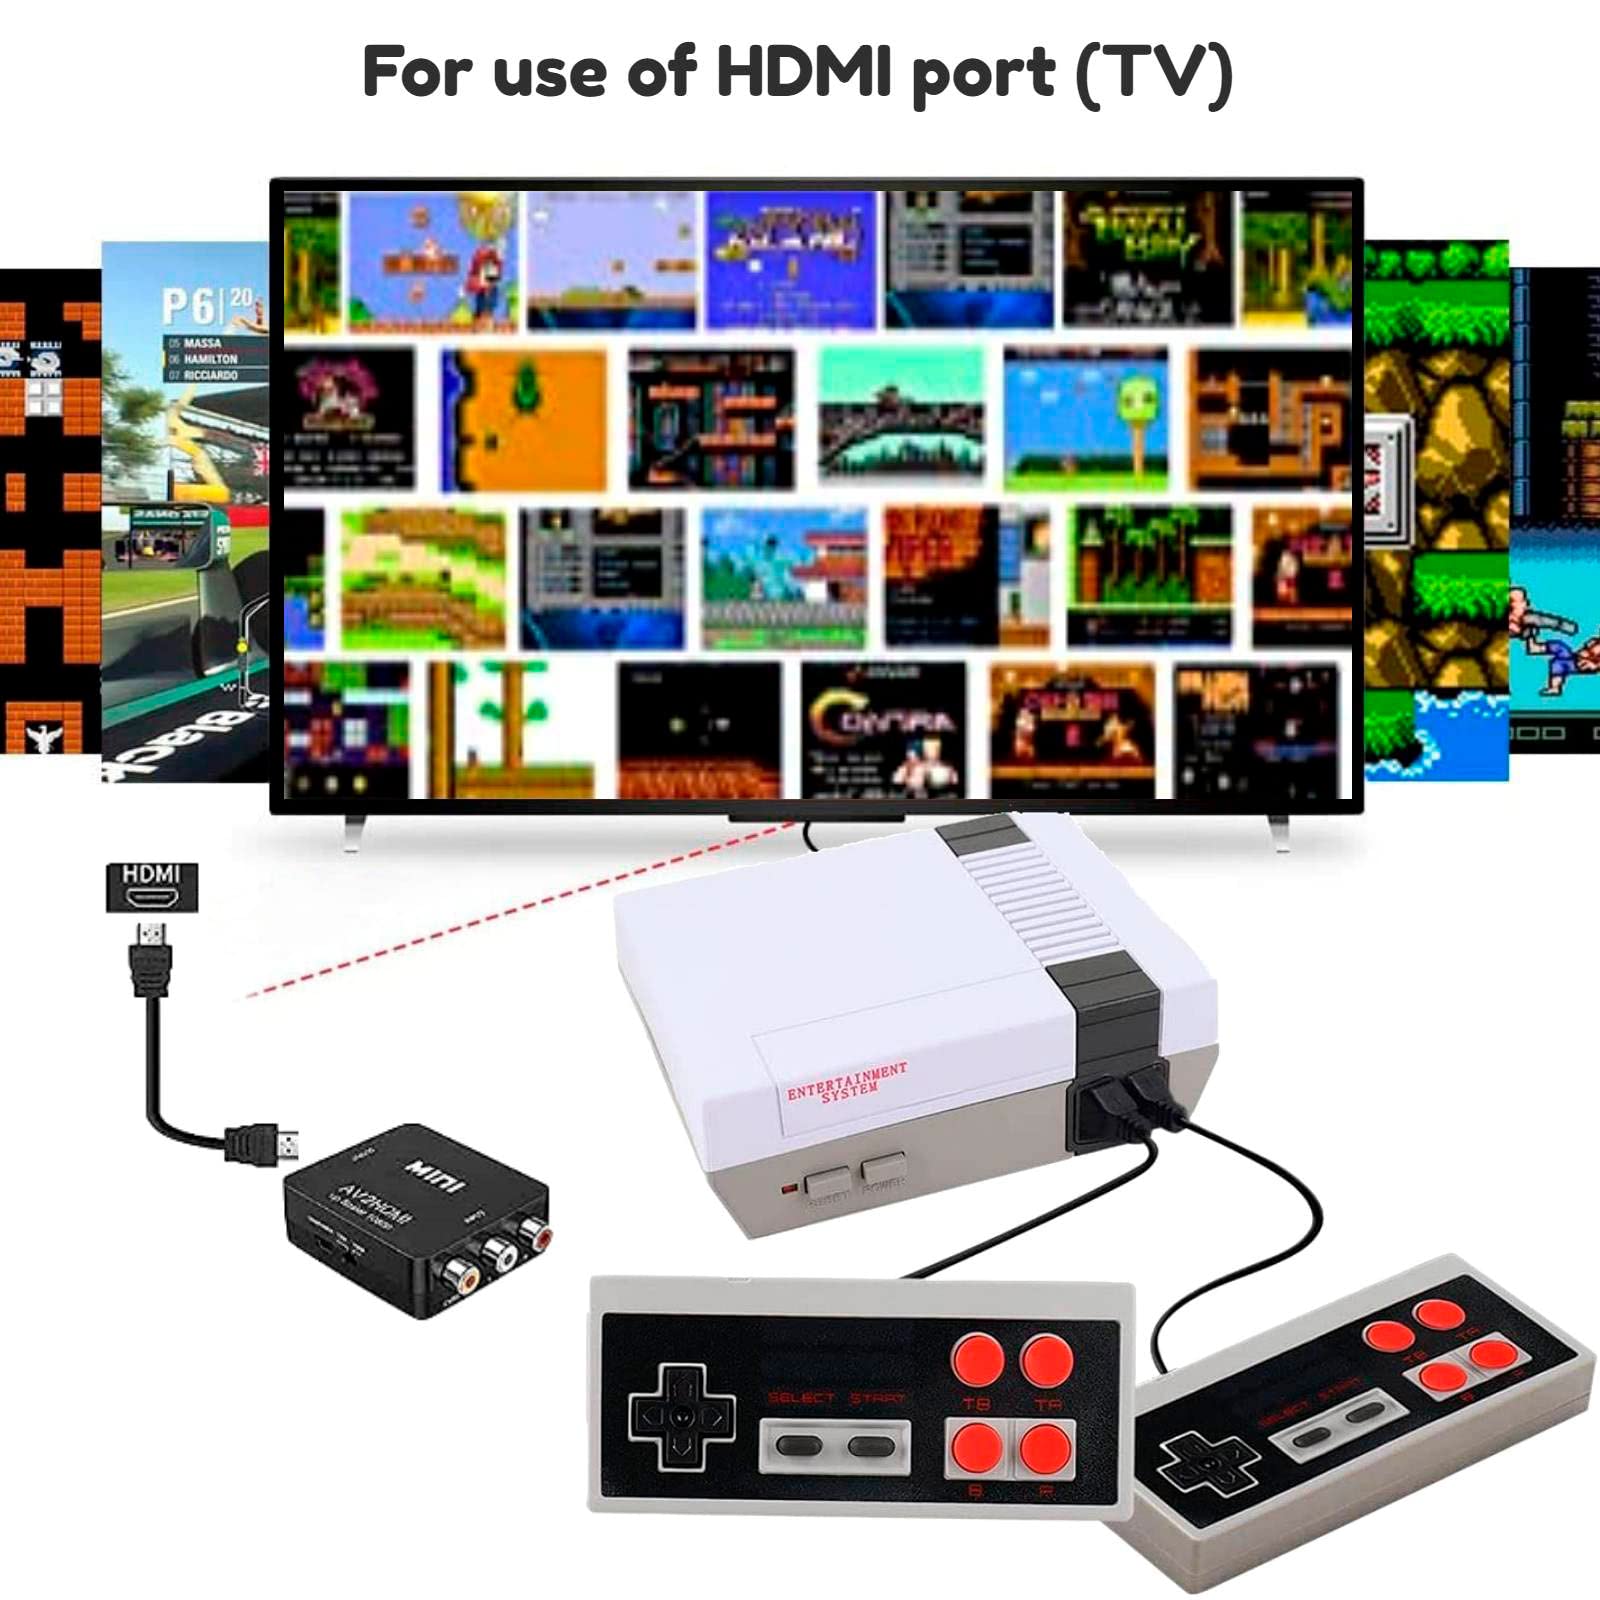 Retro Classic Game Console,Classic Video Games System Built-in 620 Games and 2 Classic Edition Controllers,Av and HDMI Output Plug and Play,Retro Toys